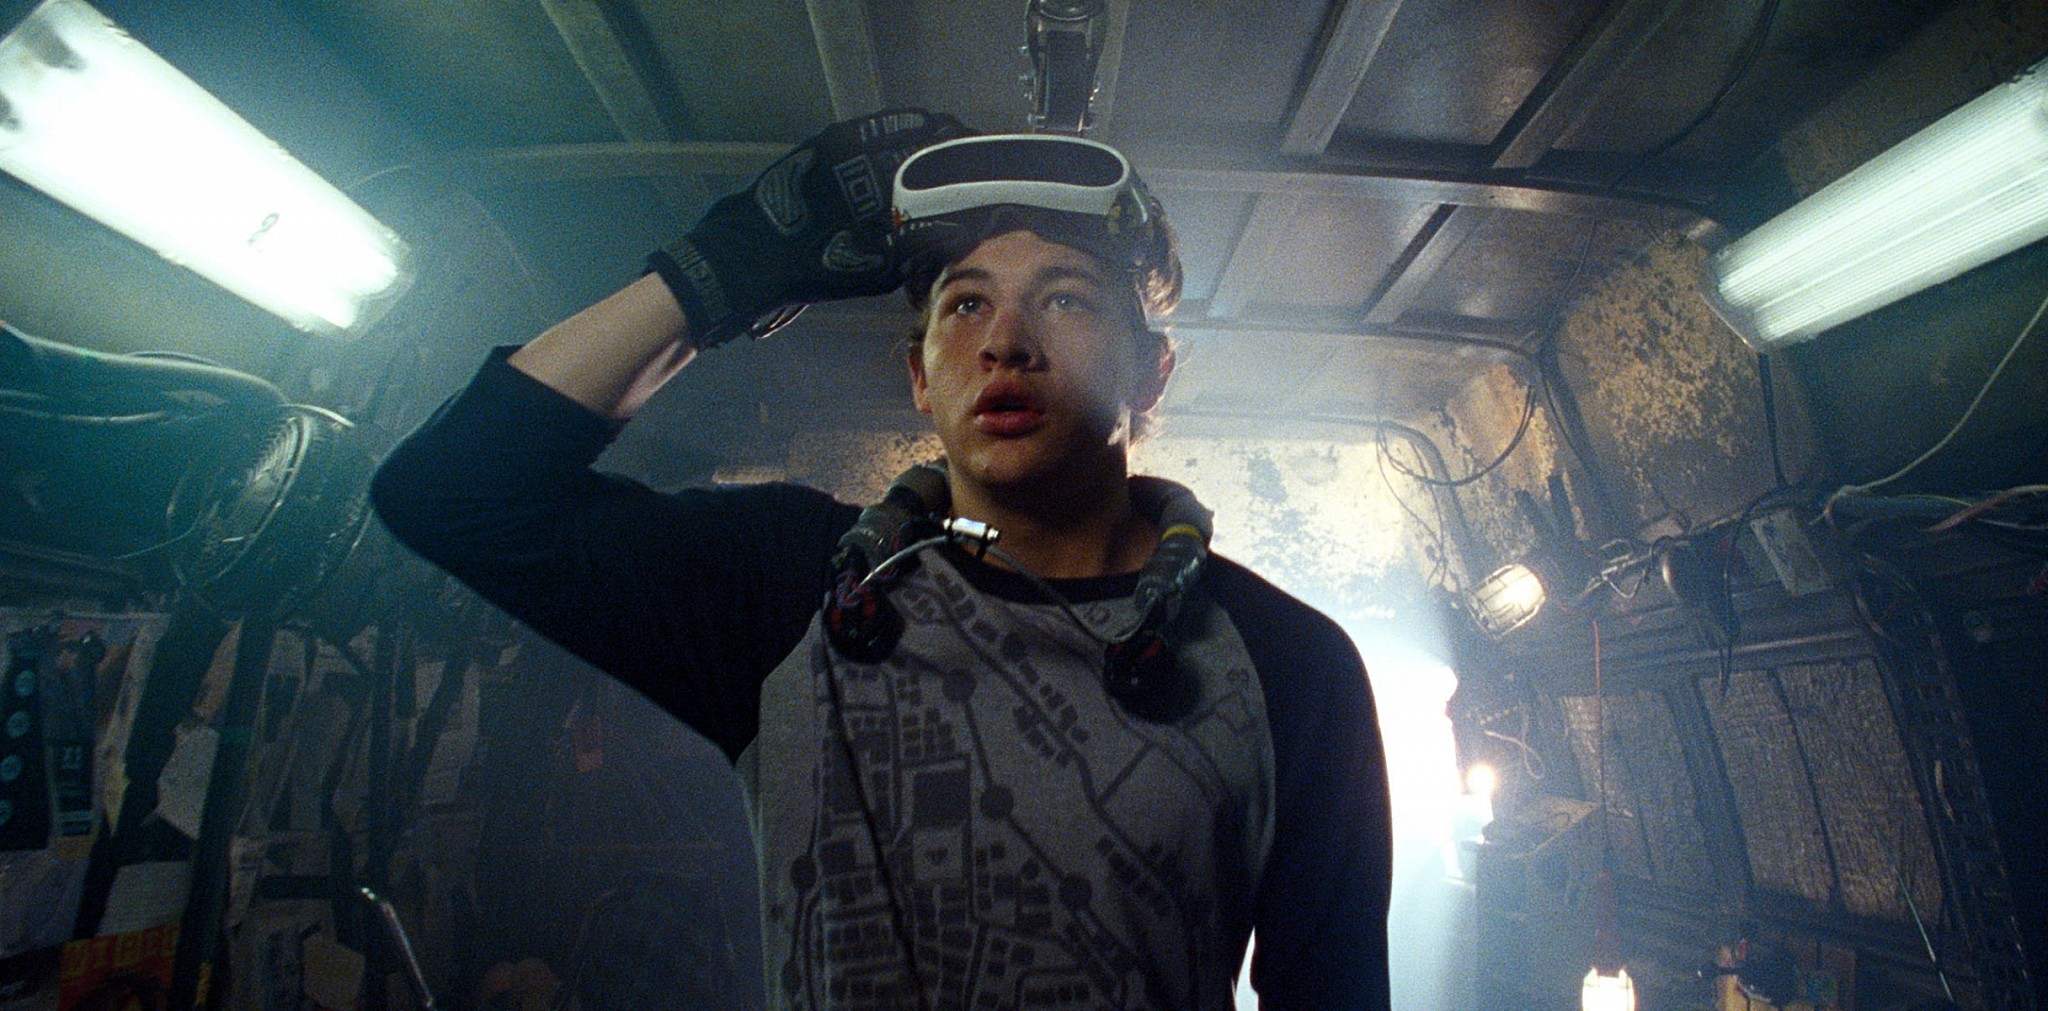 Steven Spielberg's 'Ready Player One' Tops Holiday Box-Office